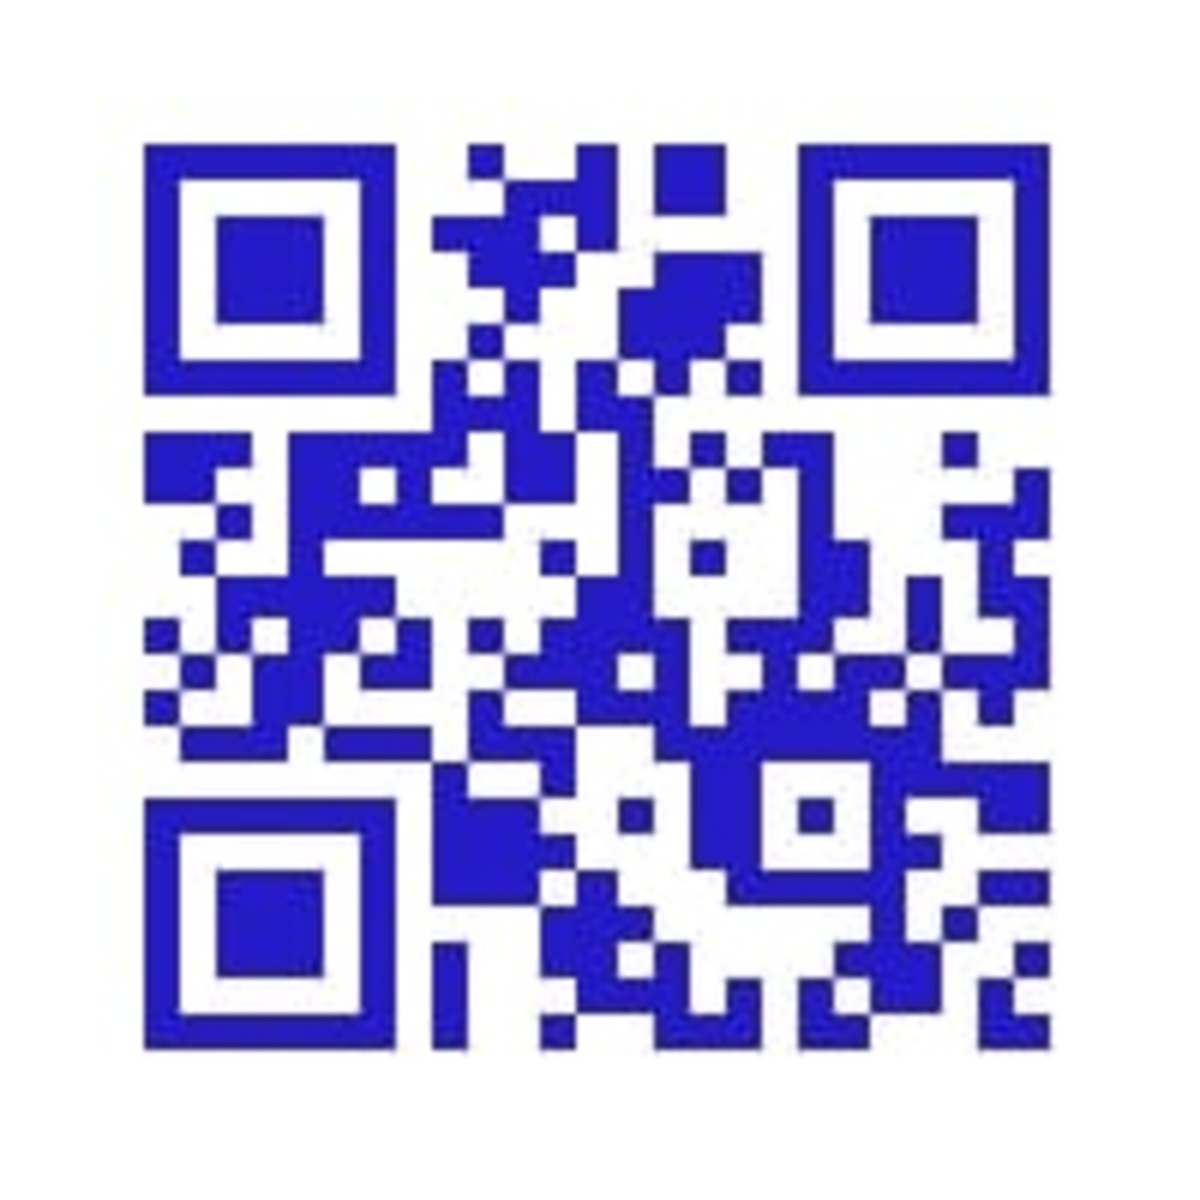 This QR code when scanned will take you directly to another Hub Pages article written about additional small business marketing know how  by this same author.